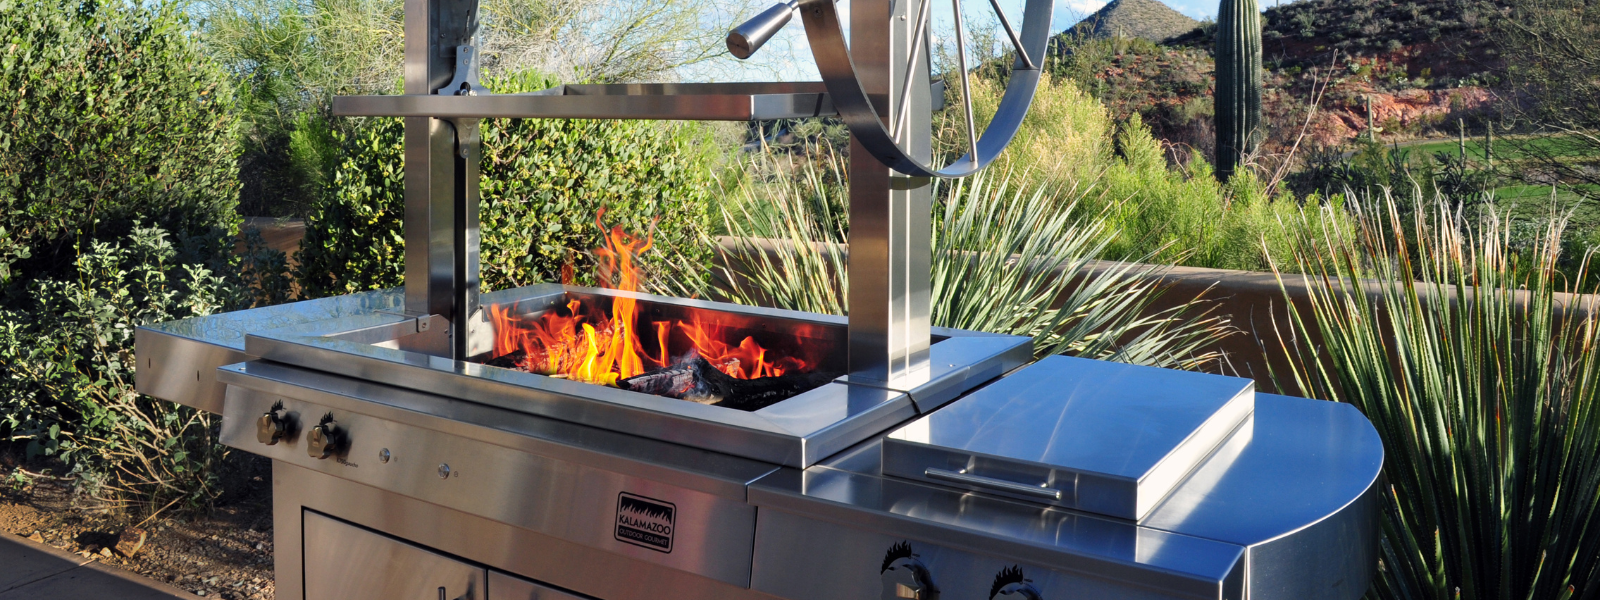 Kalamazoo Gaucho Grill available from Kitchen in the Garden, Surrey, UK